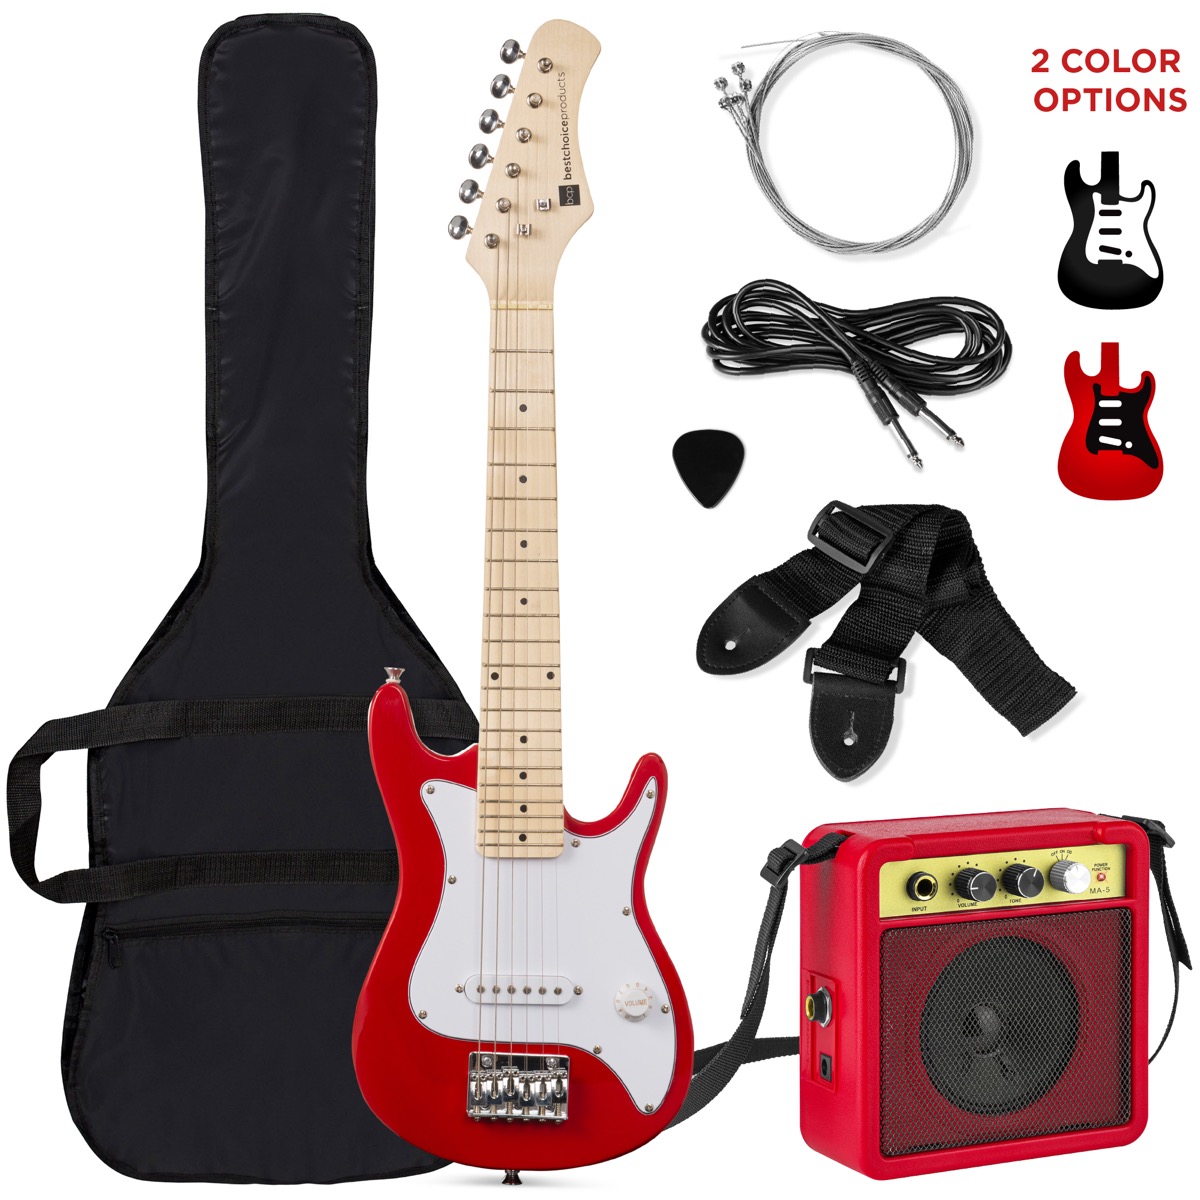 Red electric guitar with accessories